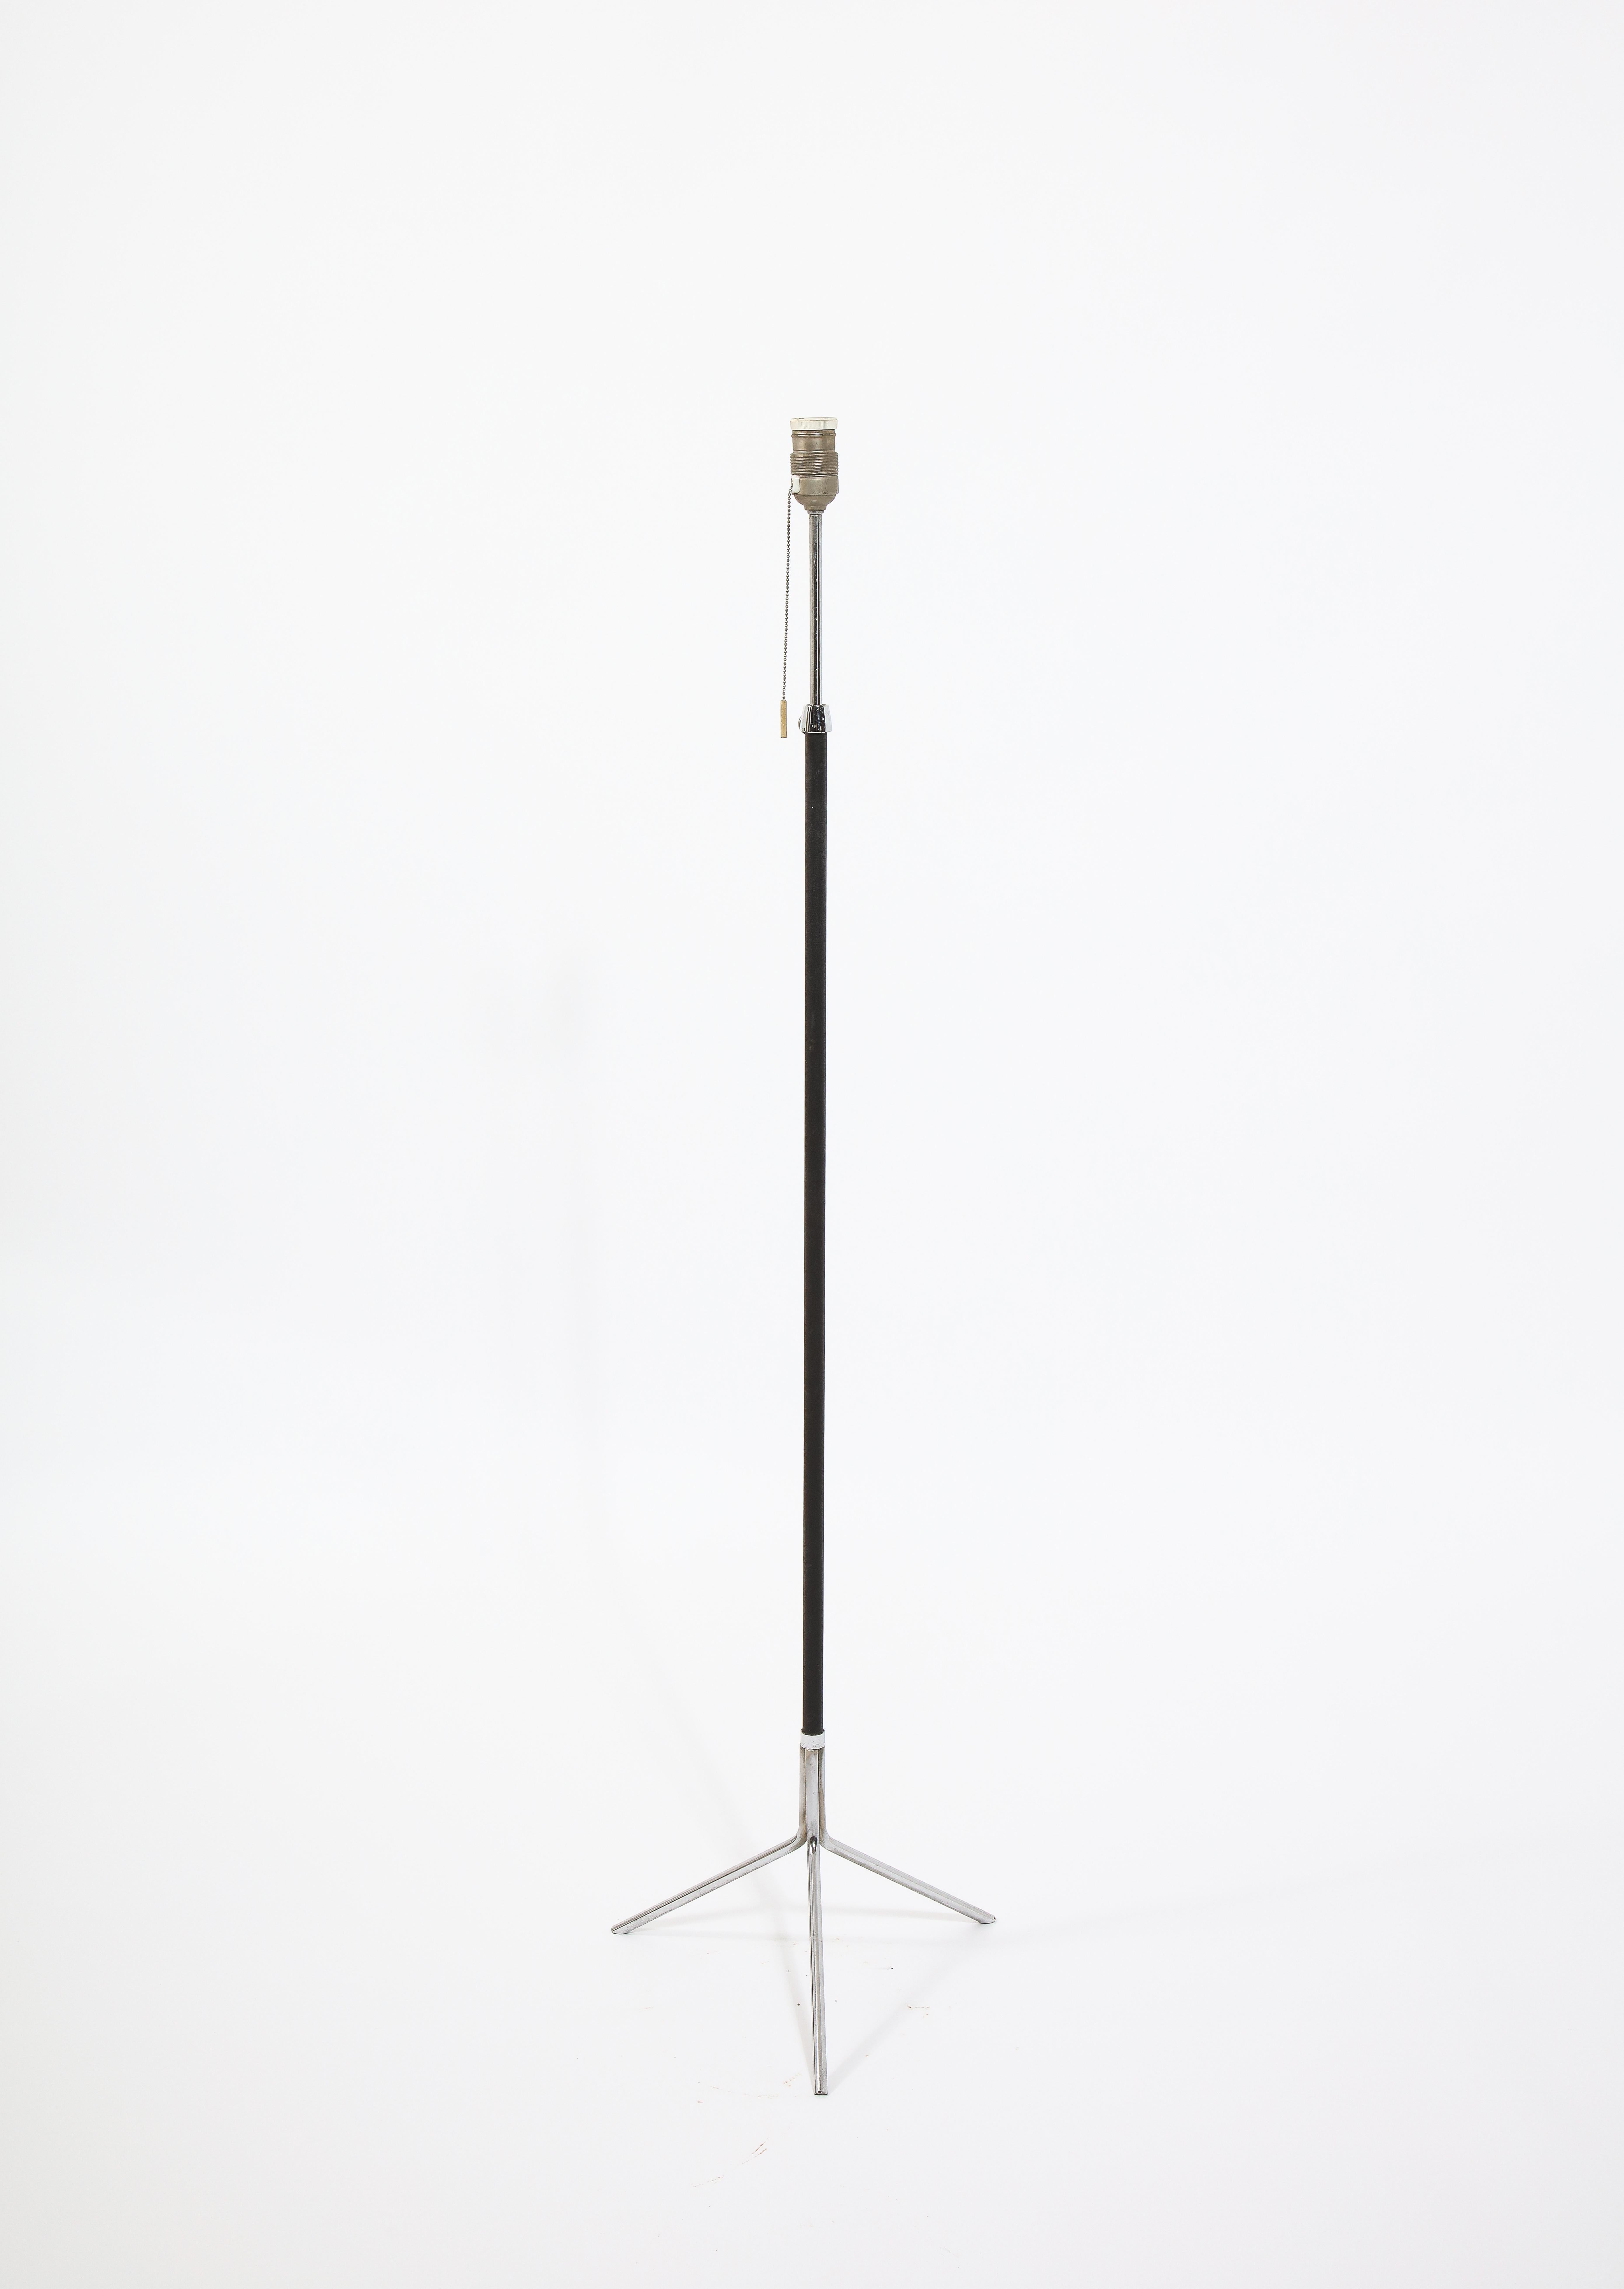 20th Century Tripod Nickel and Stitched Leather Standing Lamp after Adnet, France 1950's For Sale